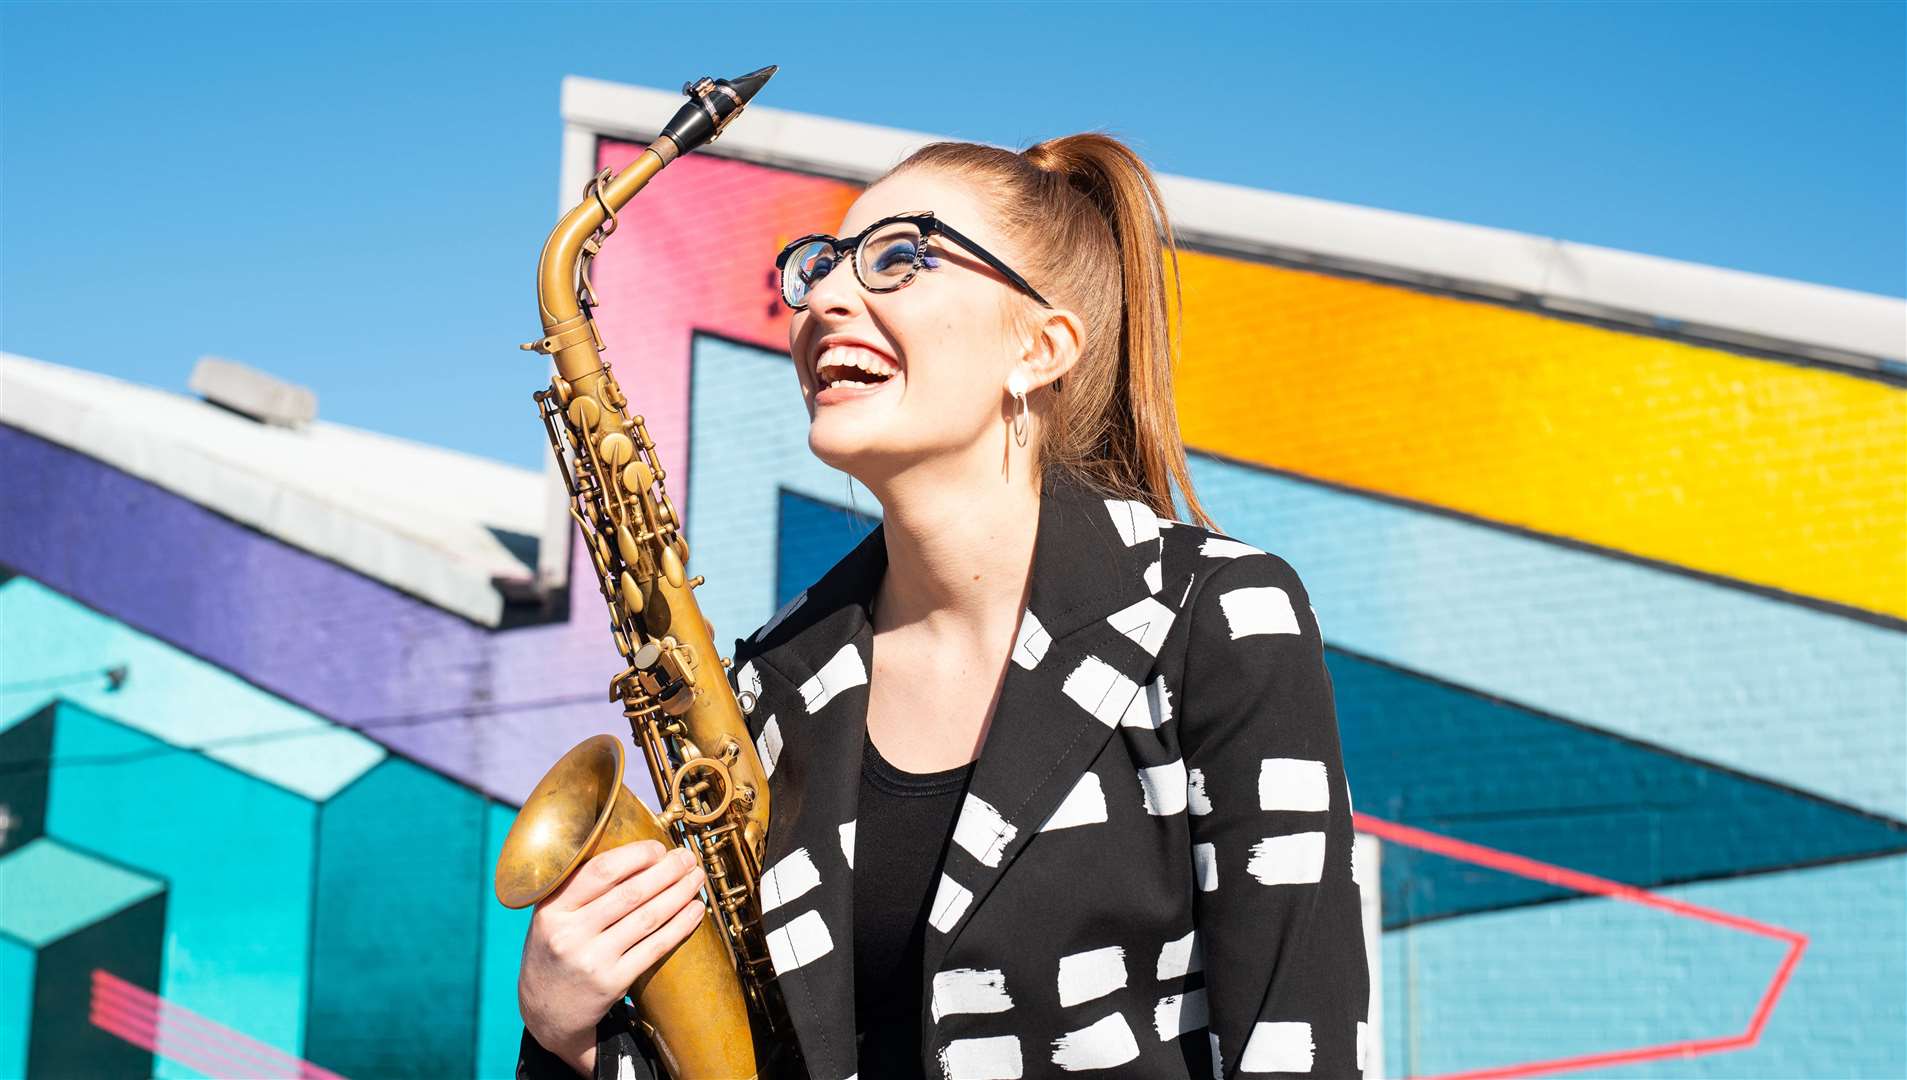 The world premiere of The Keys of Canterbury, a Canterbury Festival commission by John Harle, will be performed by saxophonist Jess Gillam